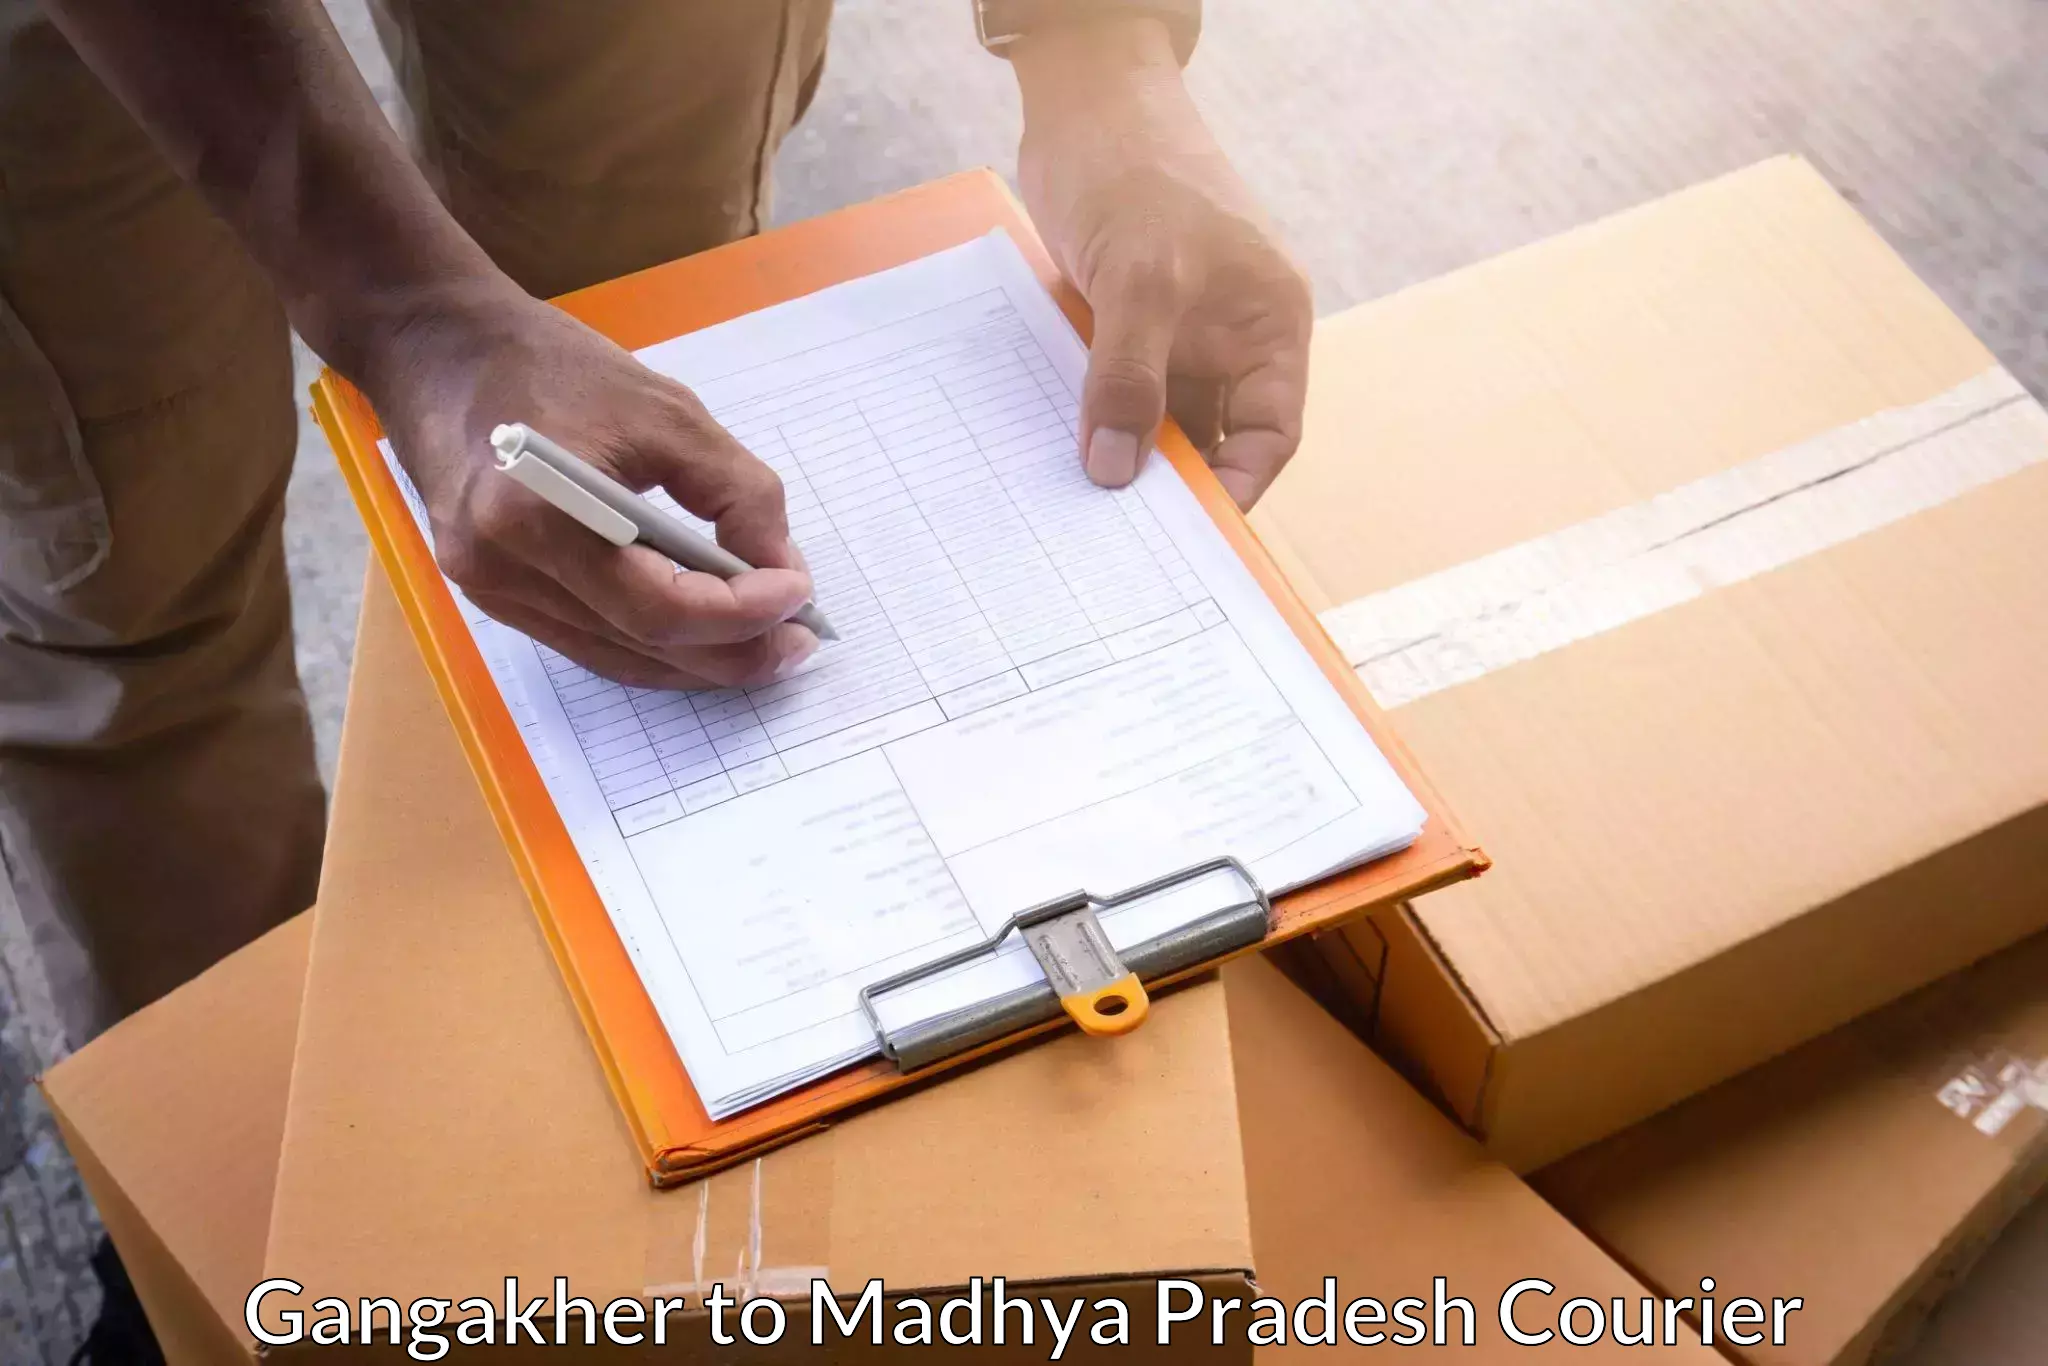 Overnight delivery services Gangakher to Indore